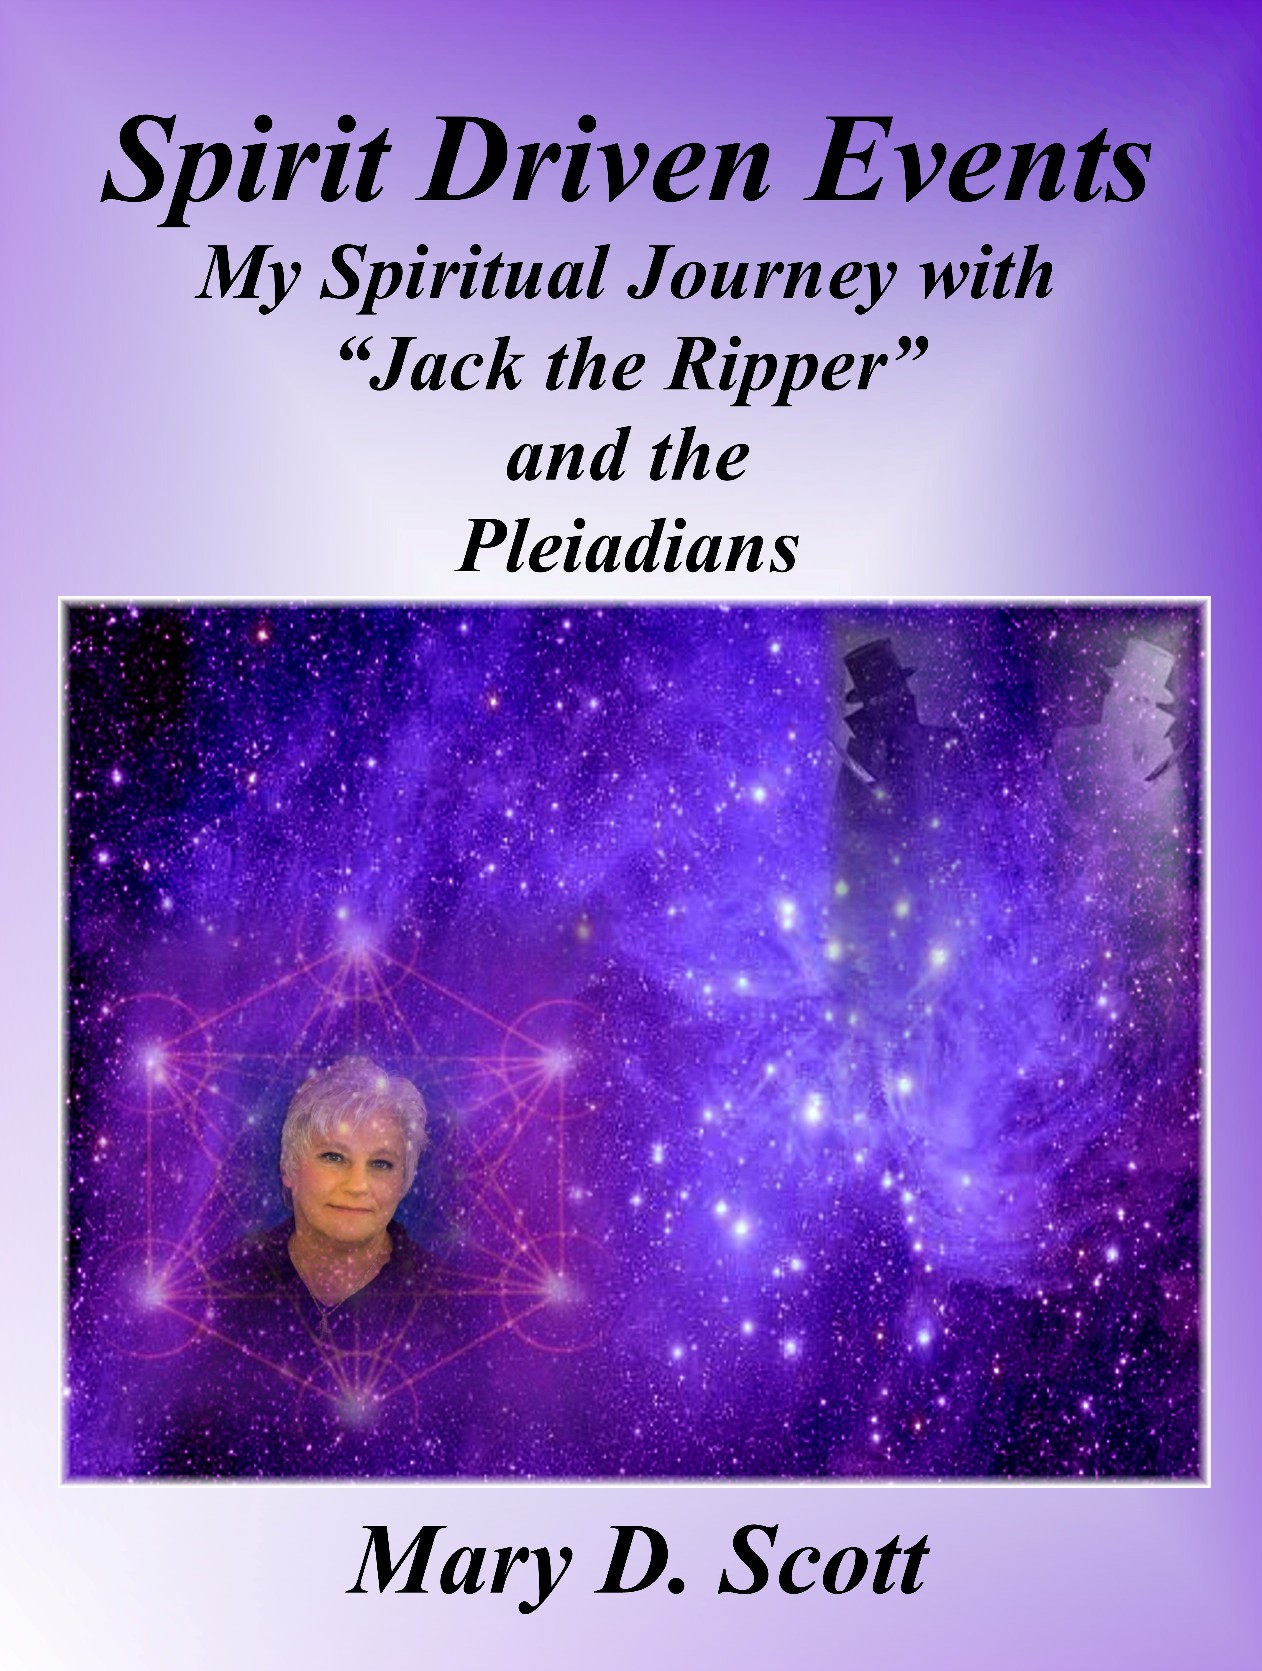 Spirit Driven Events - My Spiritual Journey with "Jack the Ripper" and the Pleiadians